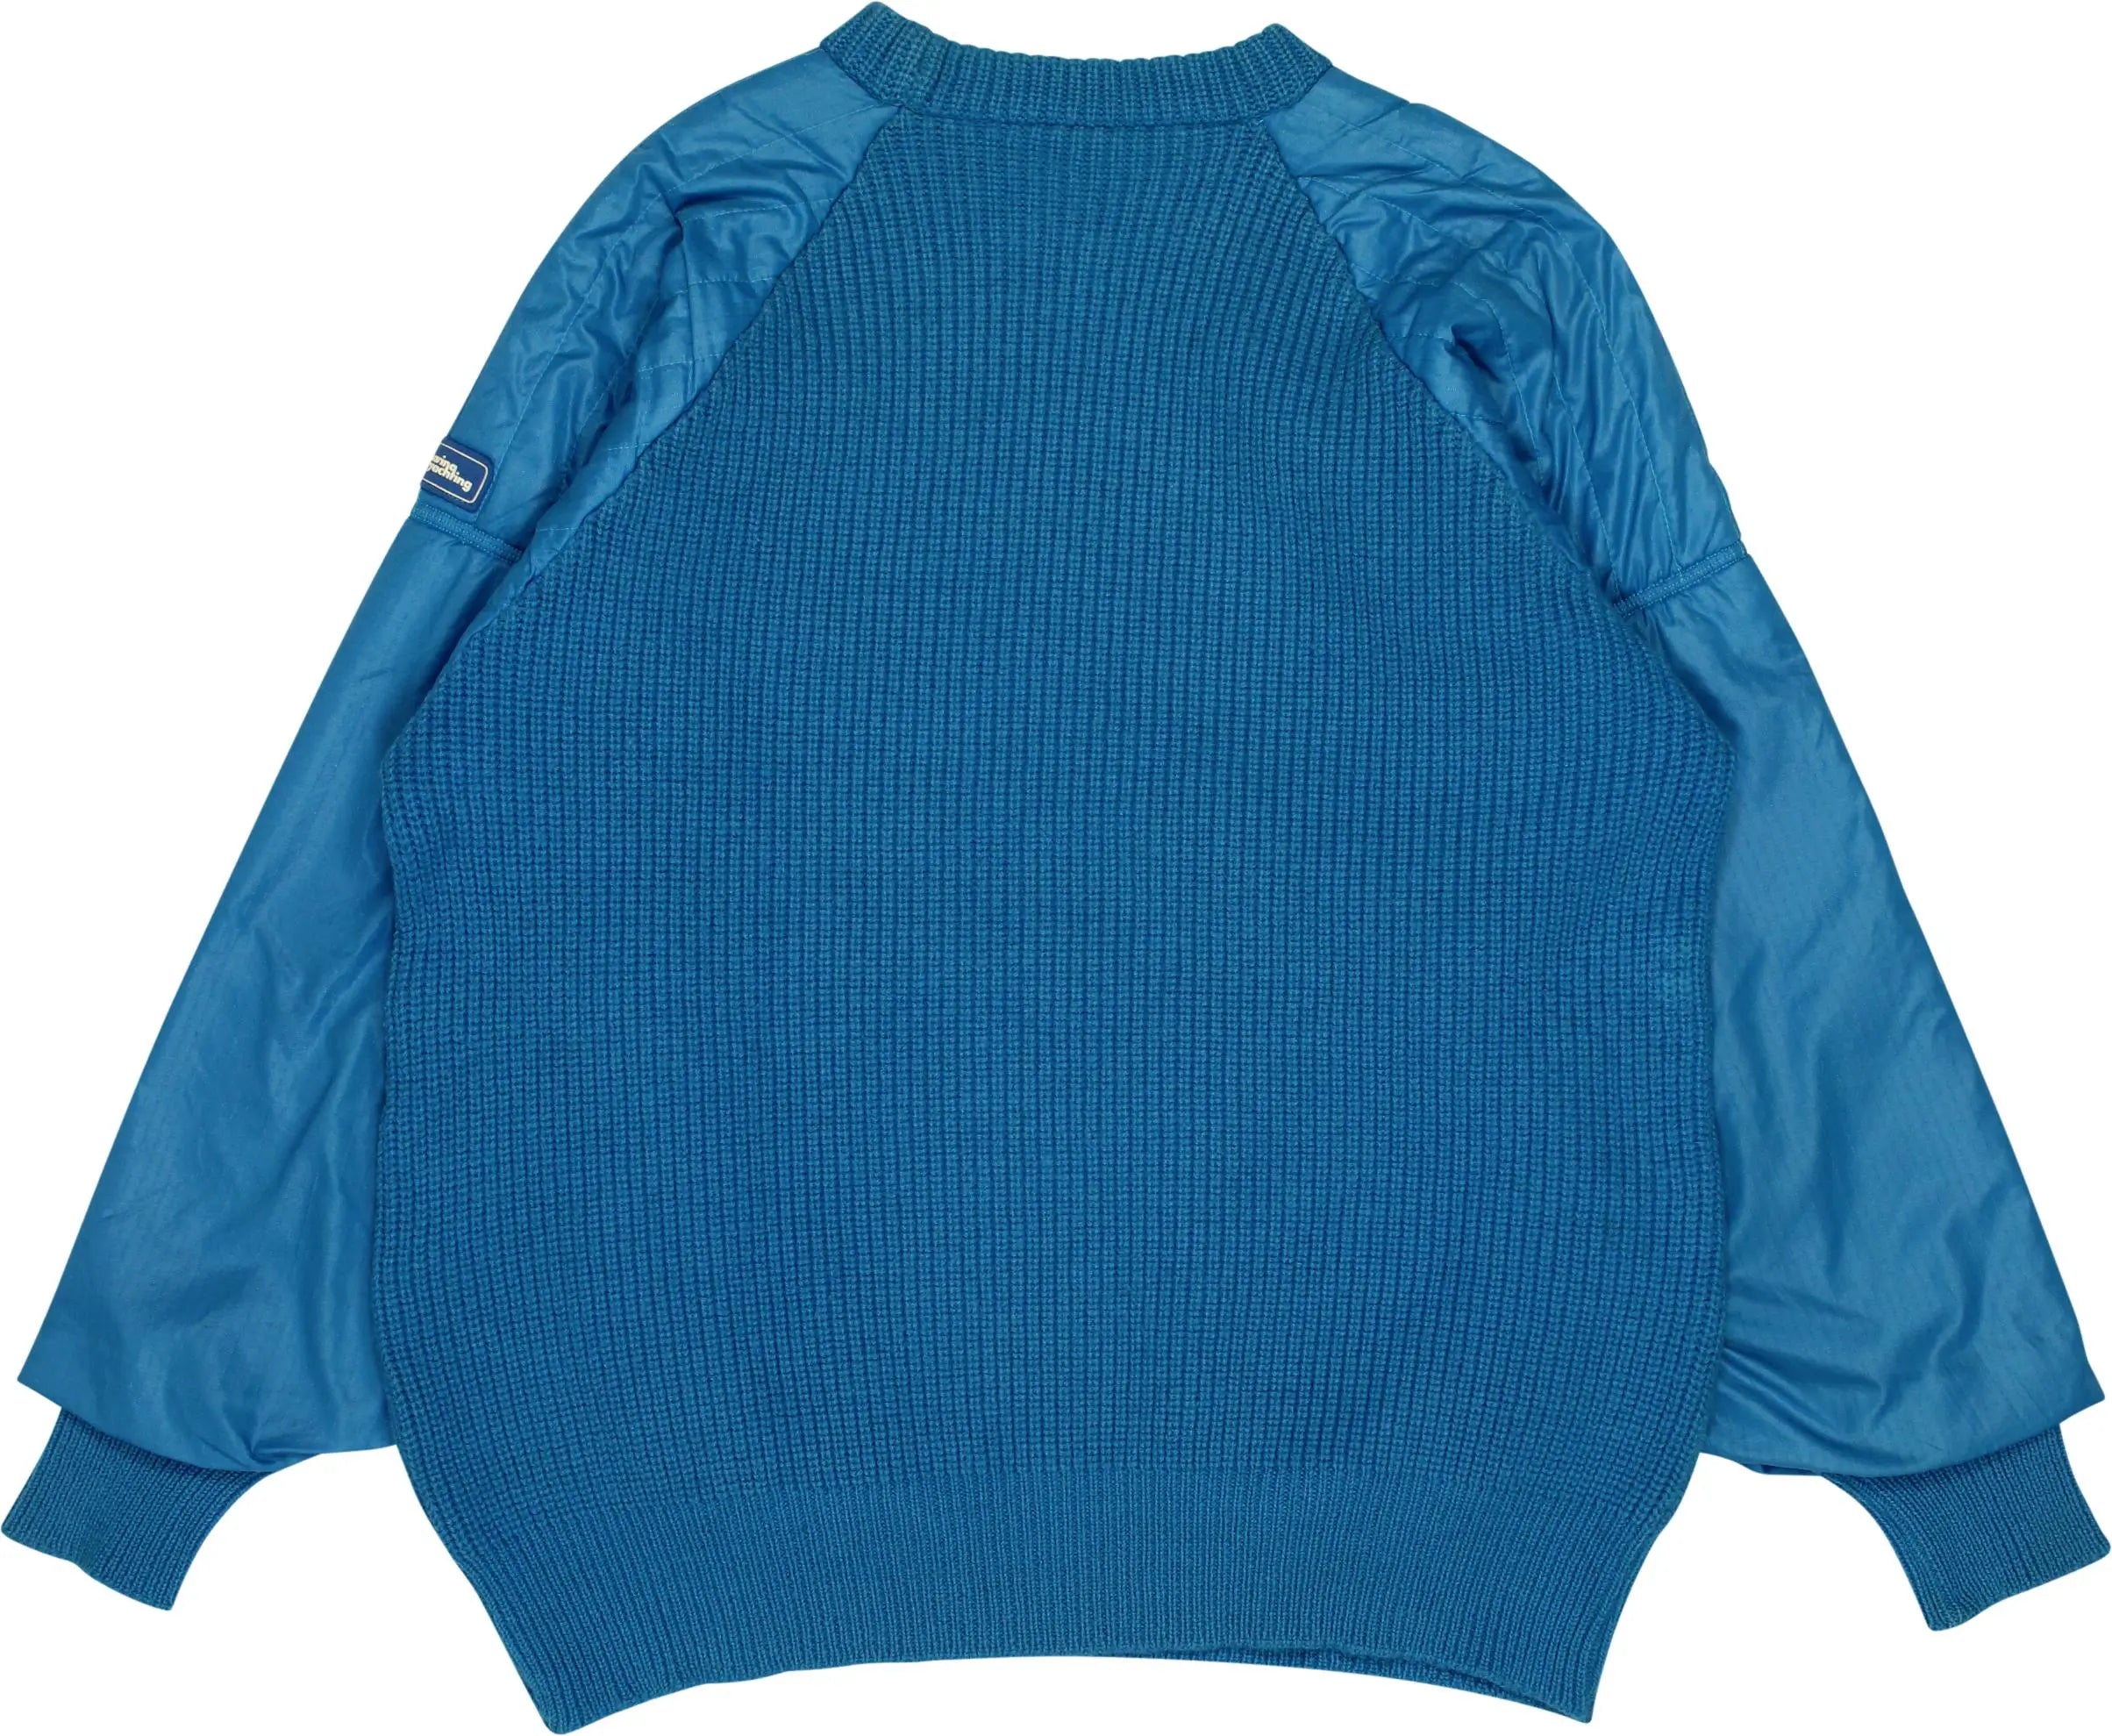 Marina Yachting - Blue Jumper by Marine Yachting- ThriftTale.com - Vintage and second handclothing